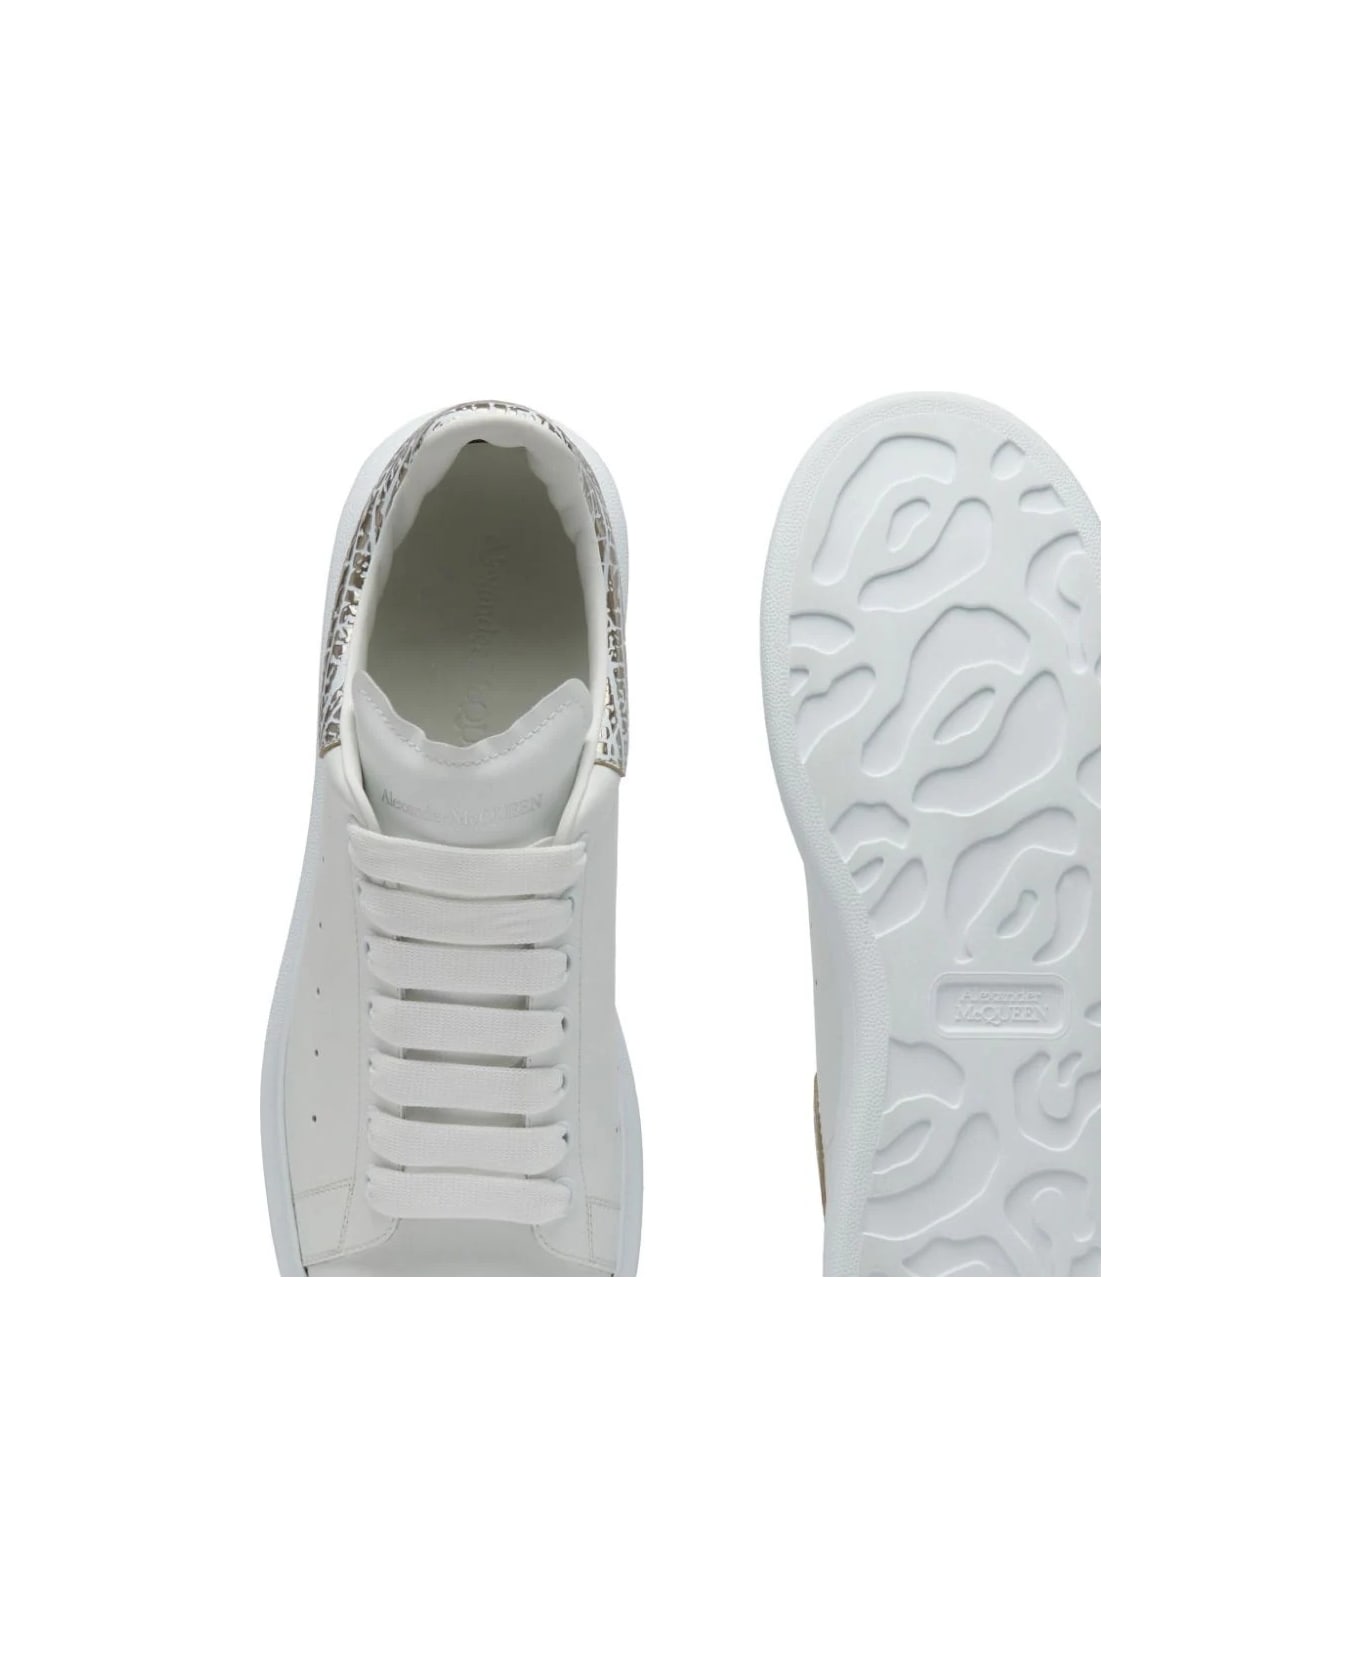 Alexander McQueen Oversized Sneakers In White And Silver - White